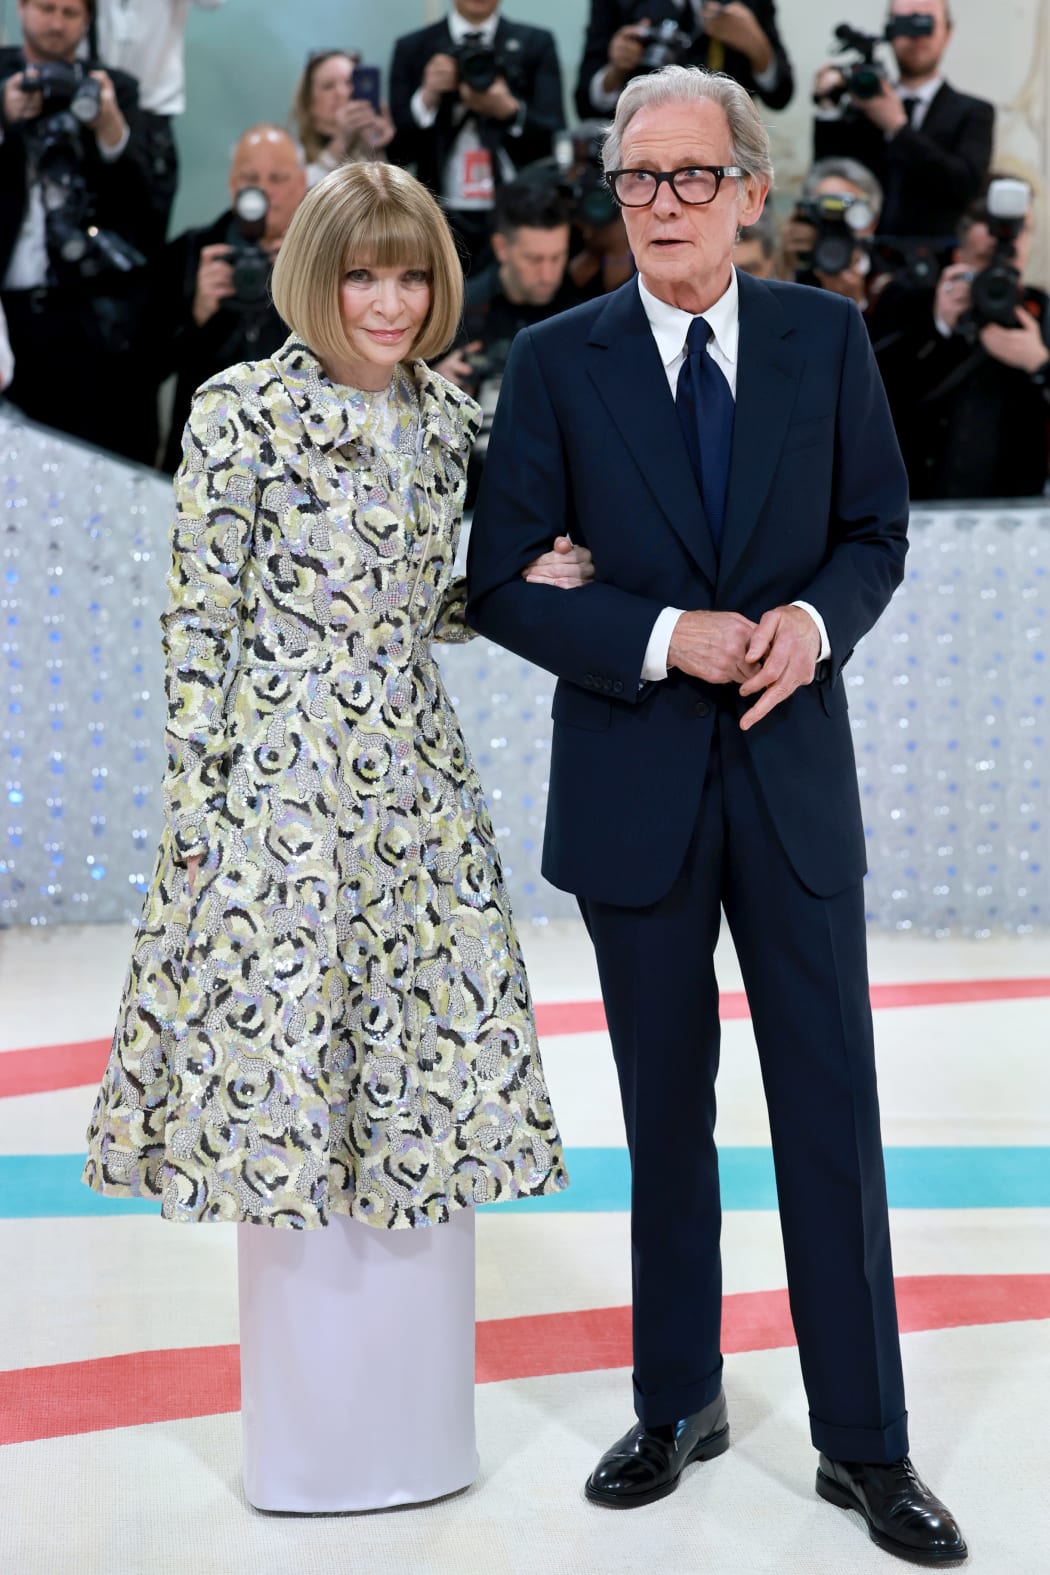 NEW YORK, NEW YORK - MAY 01: (L-R) Anna Wintour and Bill Nighy attend The 2023 Met Gala Celebrating "Karl Lagerfeld: A Line Of Beauty" at The Metropolitan Museum of Art on May 01, 2023 in New York City. (Photo by Theo Wargo/Getty Images for Karl Lagerfeld)